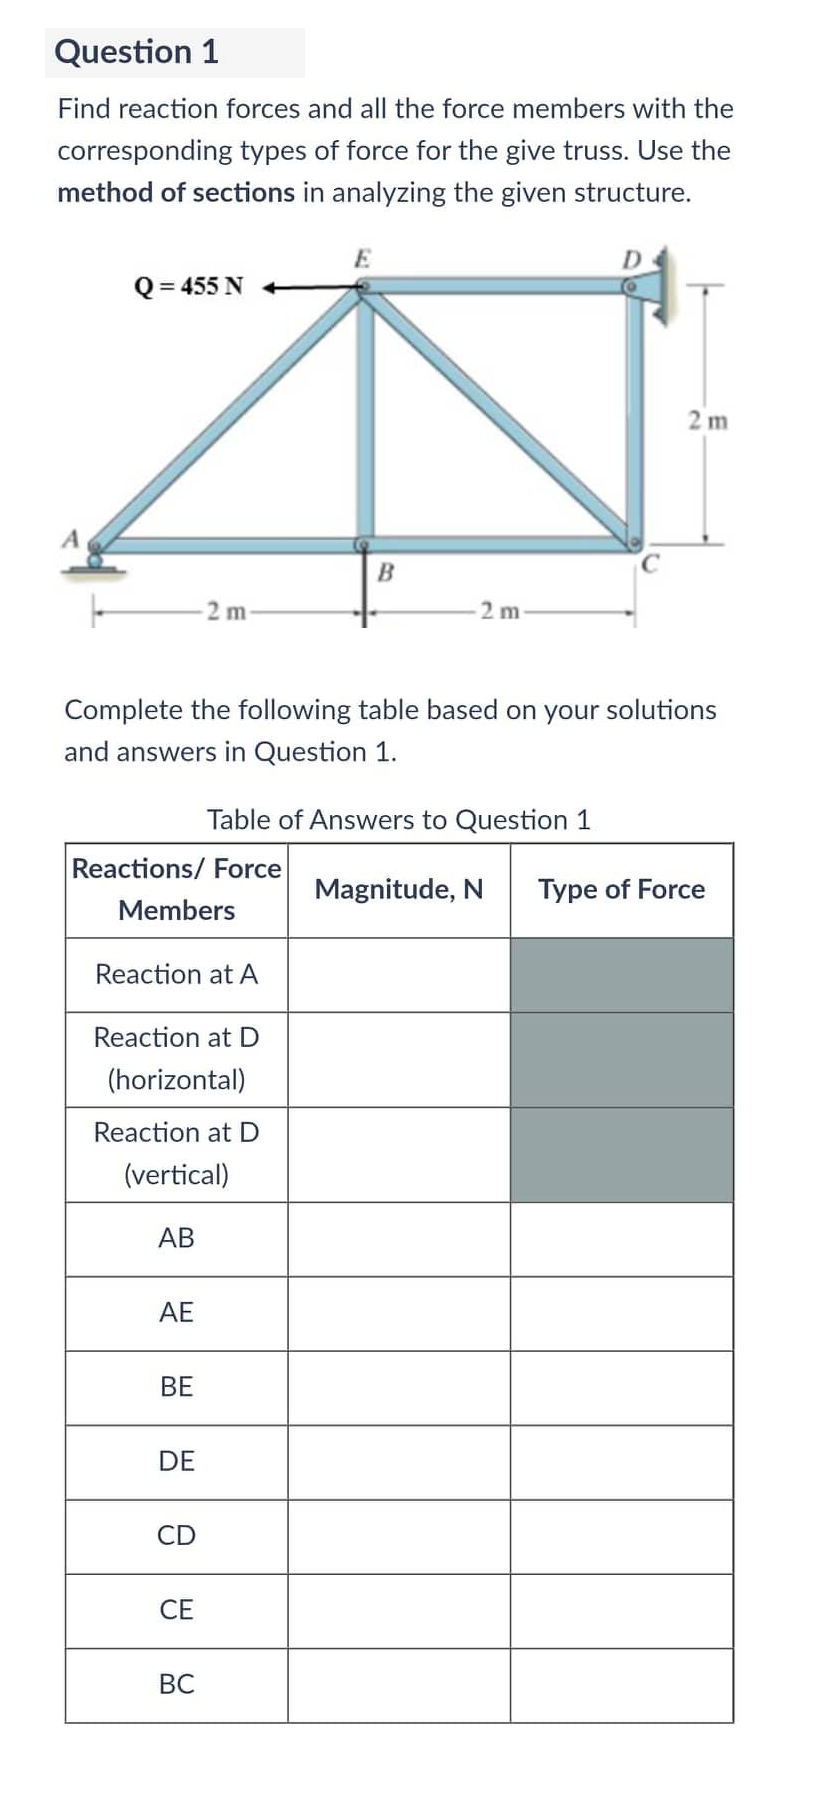 Question 1
Find reaction forces and all the force members with the
corresponding types of force for the give truss. Use the
method of sections in analyzing the given structure.
E
D
= 455 N
2m
B
2 m
2m
Complete the following table based on your solutions
and answers in Question 1.
Table of Answers to Question 1
Reactions/ Force
Magnitude, N
Type of Force
Members
Reaction at A
Reaction at D
(horizontal)
Reaction at D
(vertical)
AB
AE
| |
BE
DE
CE
BC